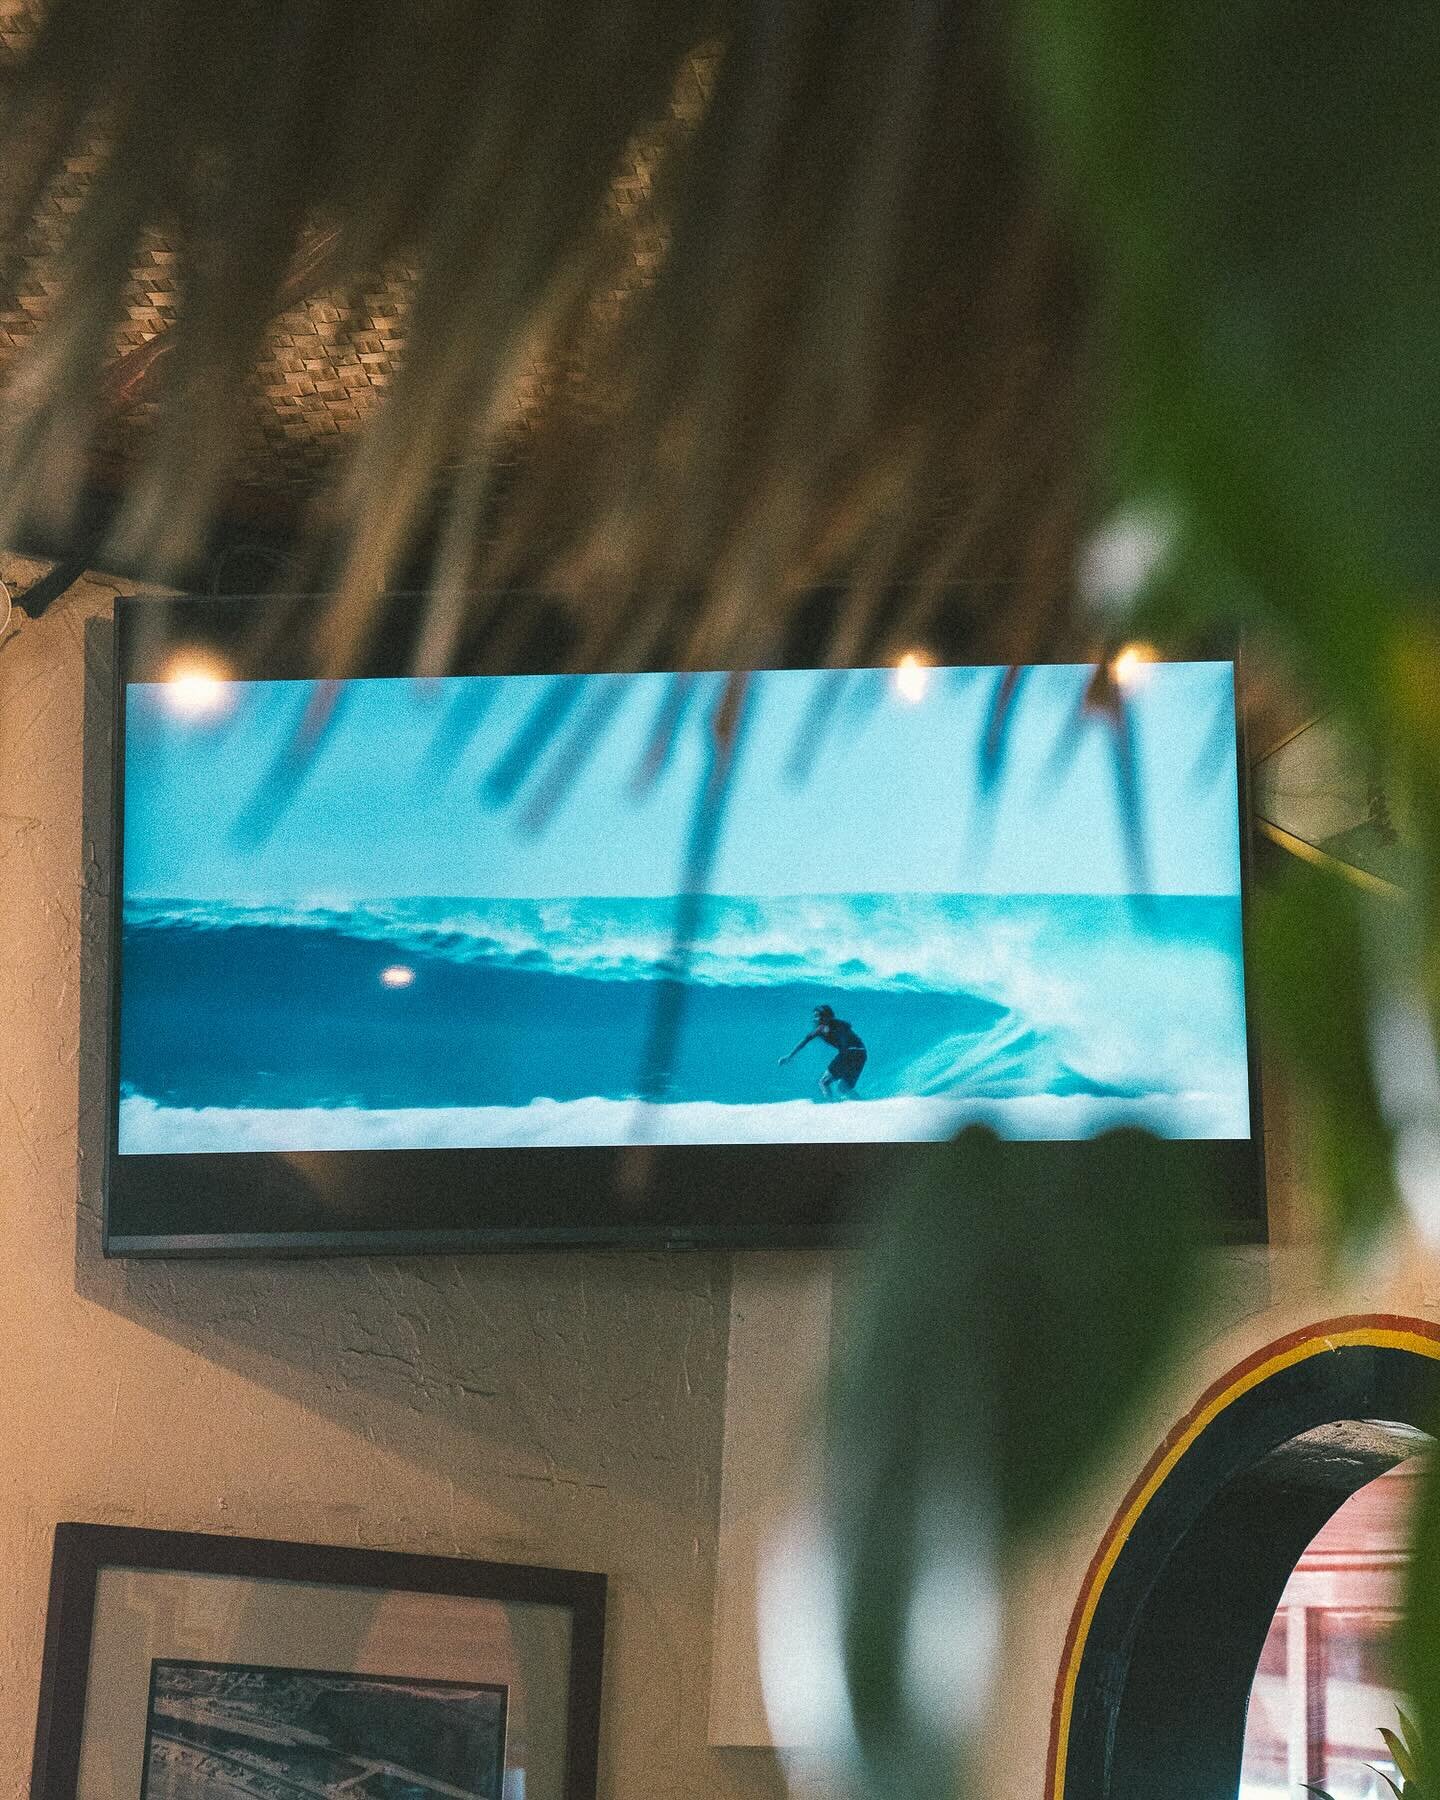 The 2nd bar stool over from the right view 👌🏽ps. Looks like the Pipe Masters Day 2 is gonna be on today. Watch it live w/a Olas marg in hand. PSPs Tuesday means Happy Hour all-night tonight!